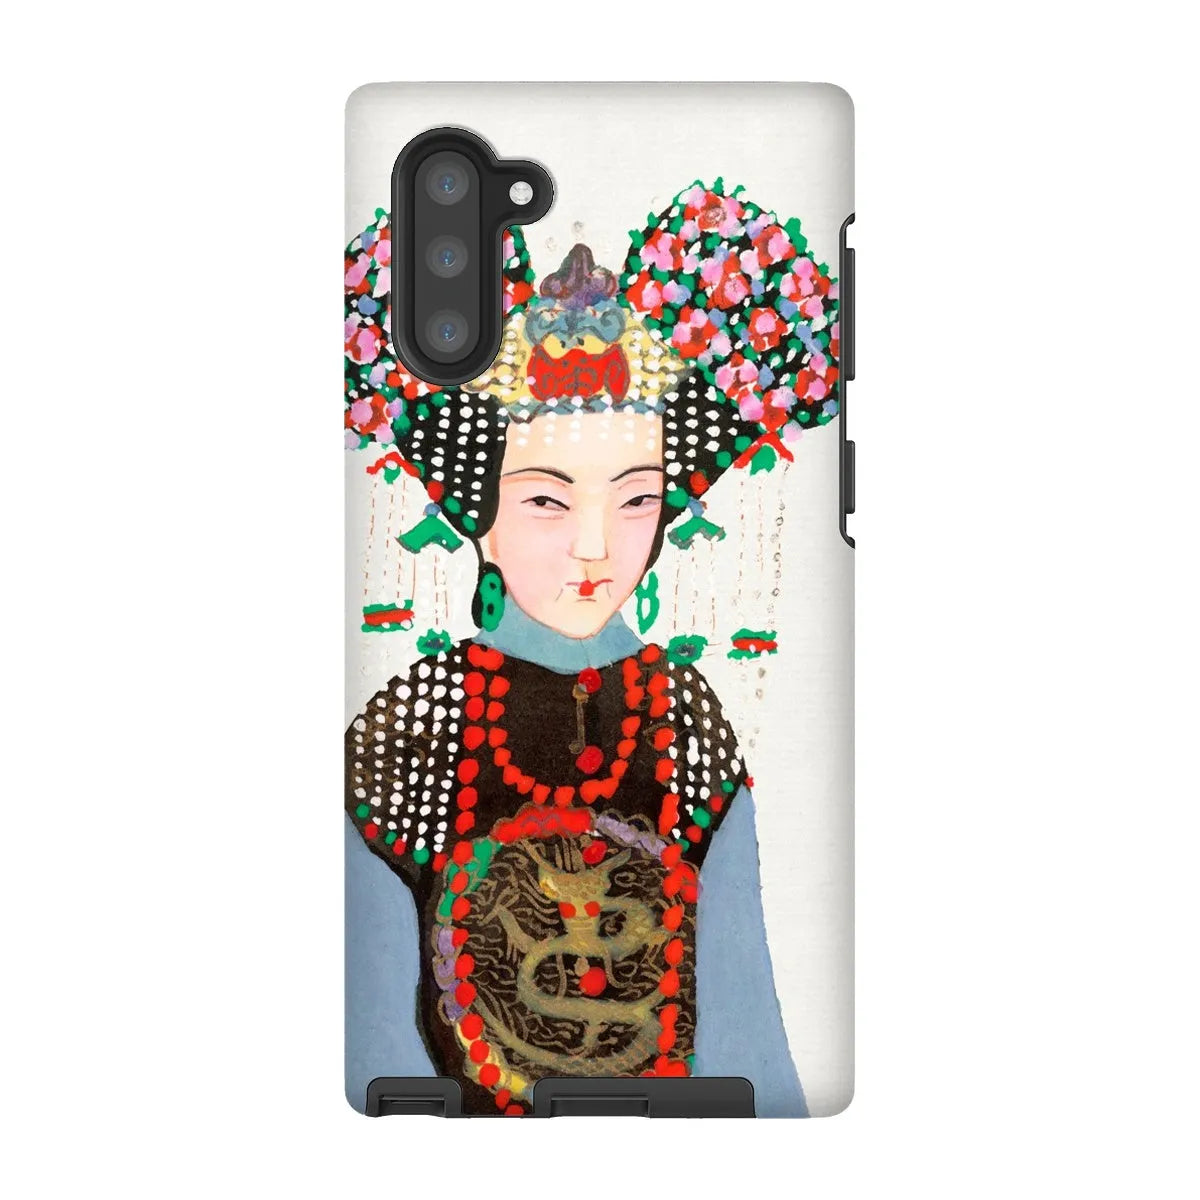 Chinese Empress - Manchu Art Phone Case - Samsung Galaxy Note 10 / Matte - Mobile Phone Cases - Aesthetic Art